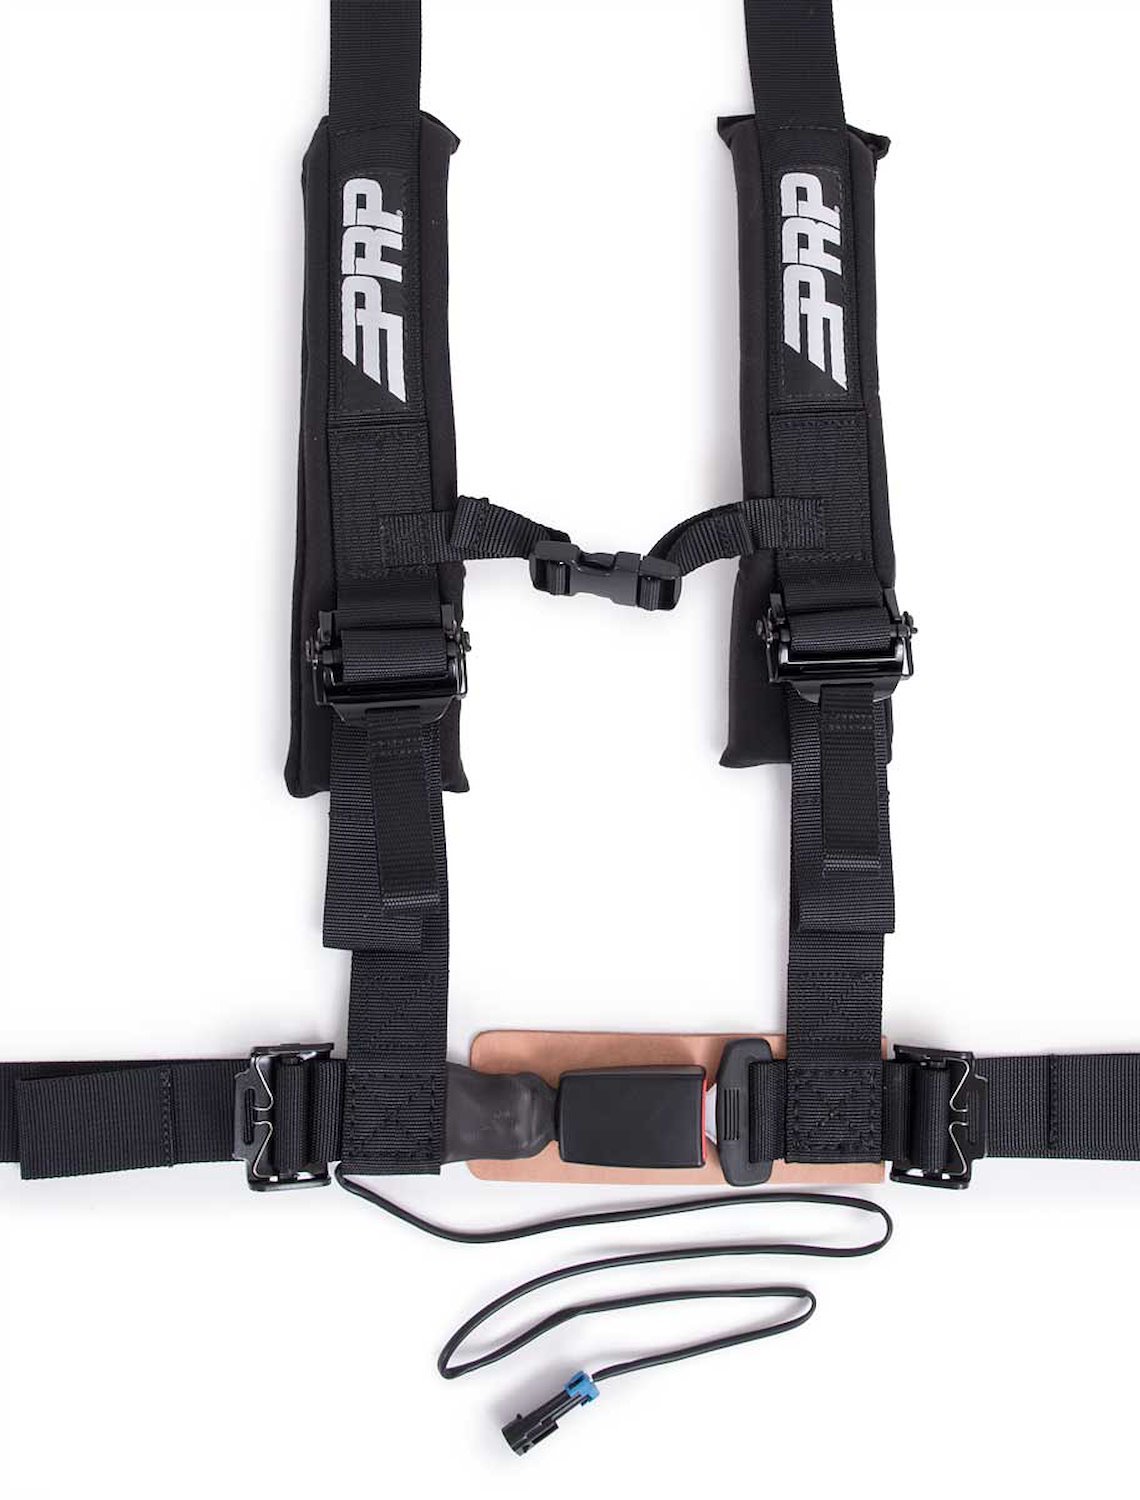 SBAUTO2D 4.2 Harness, Driver Side w/ Speed Limiter Connection, For 2015+ Polaris or Can-Am [Black]